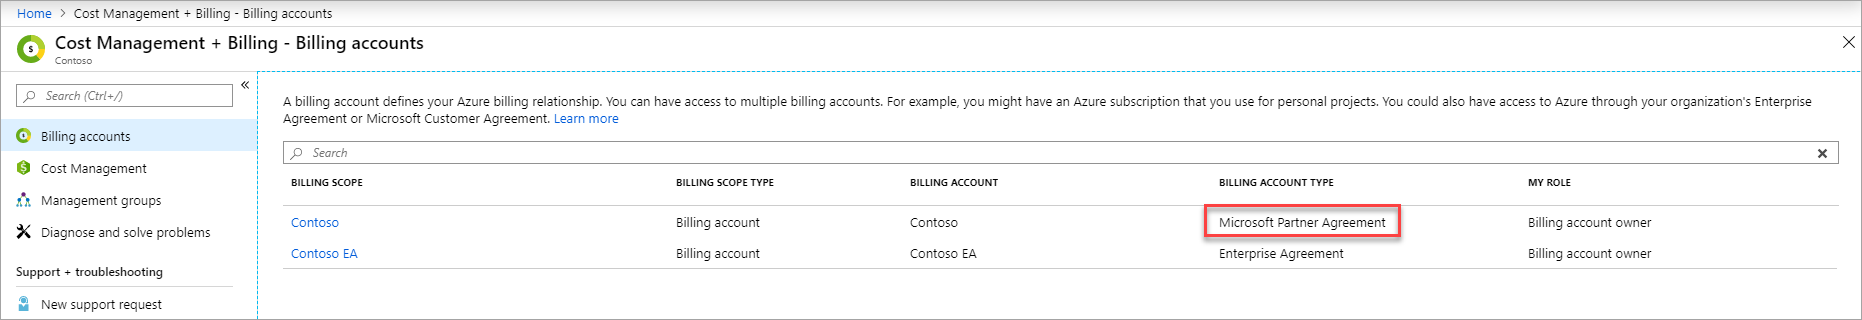 Screenshot that shows microsoft partner agreement in billing account list page